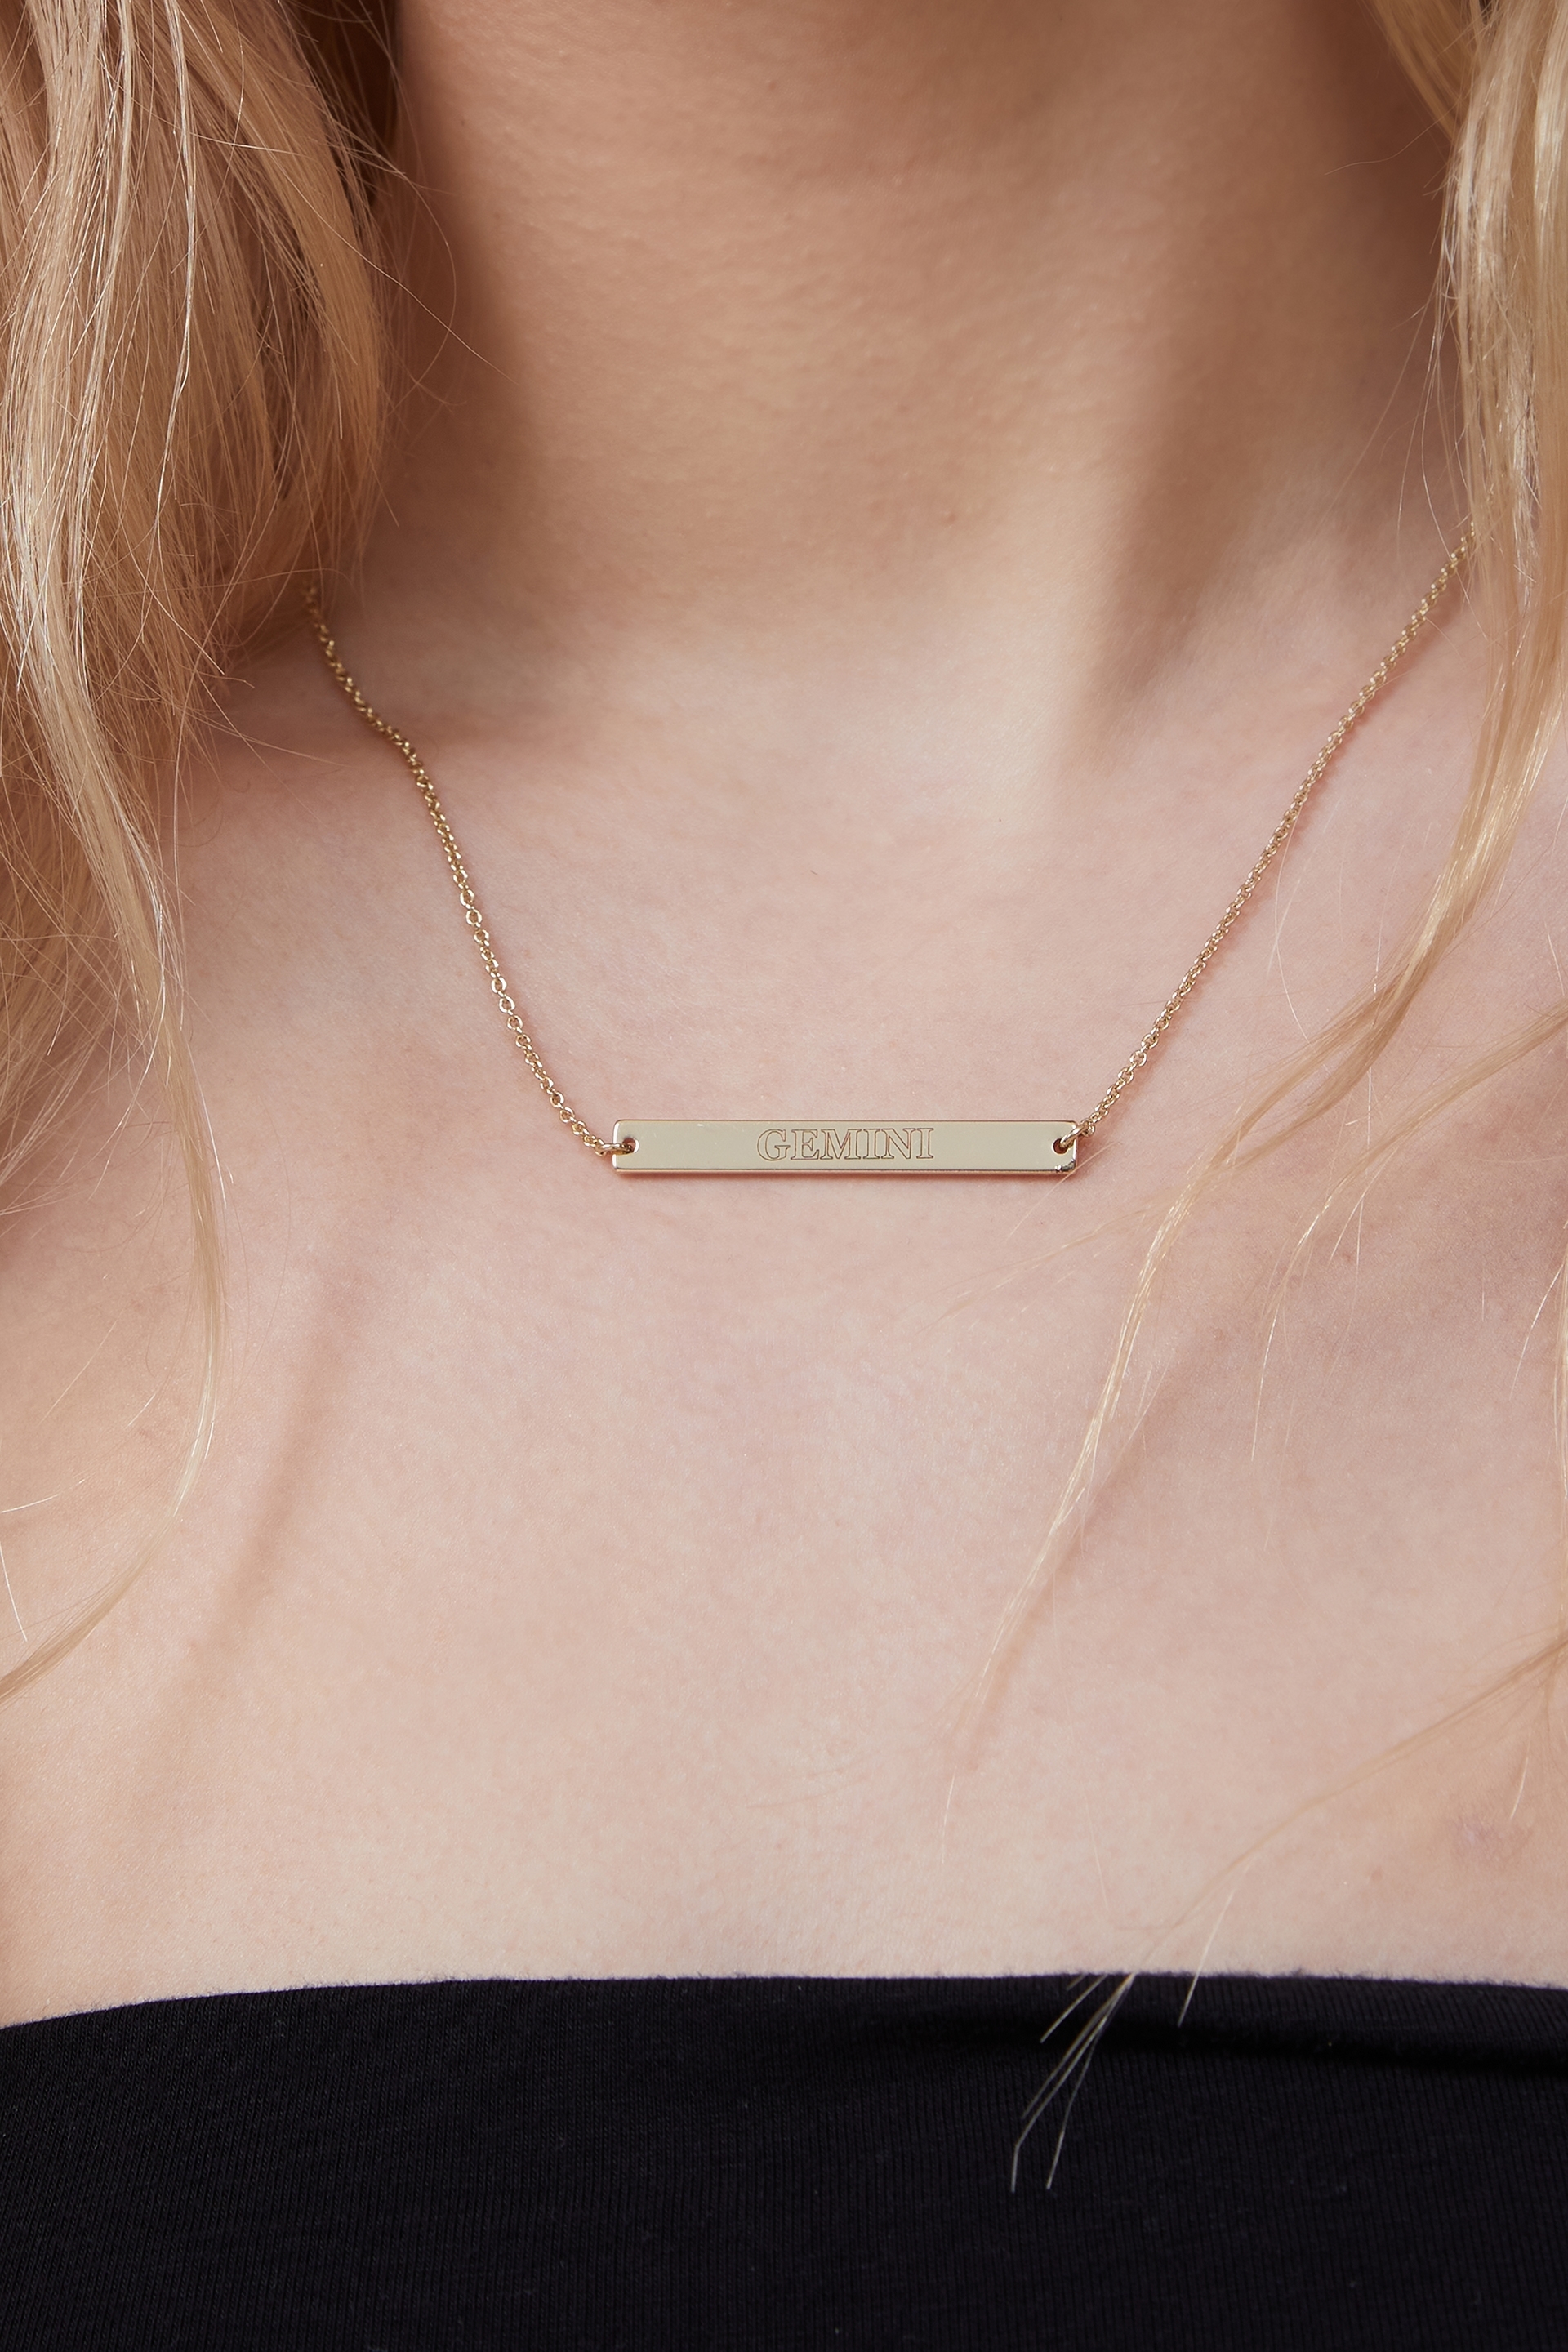 Rubi - Personalised Premium Pendant Necklace Gold Plated - Gold plated bar